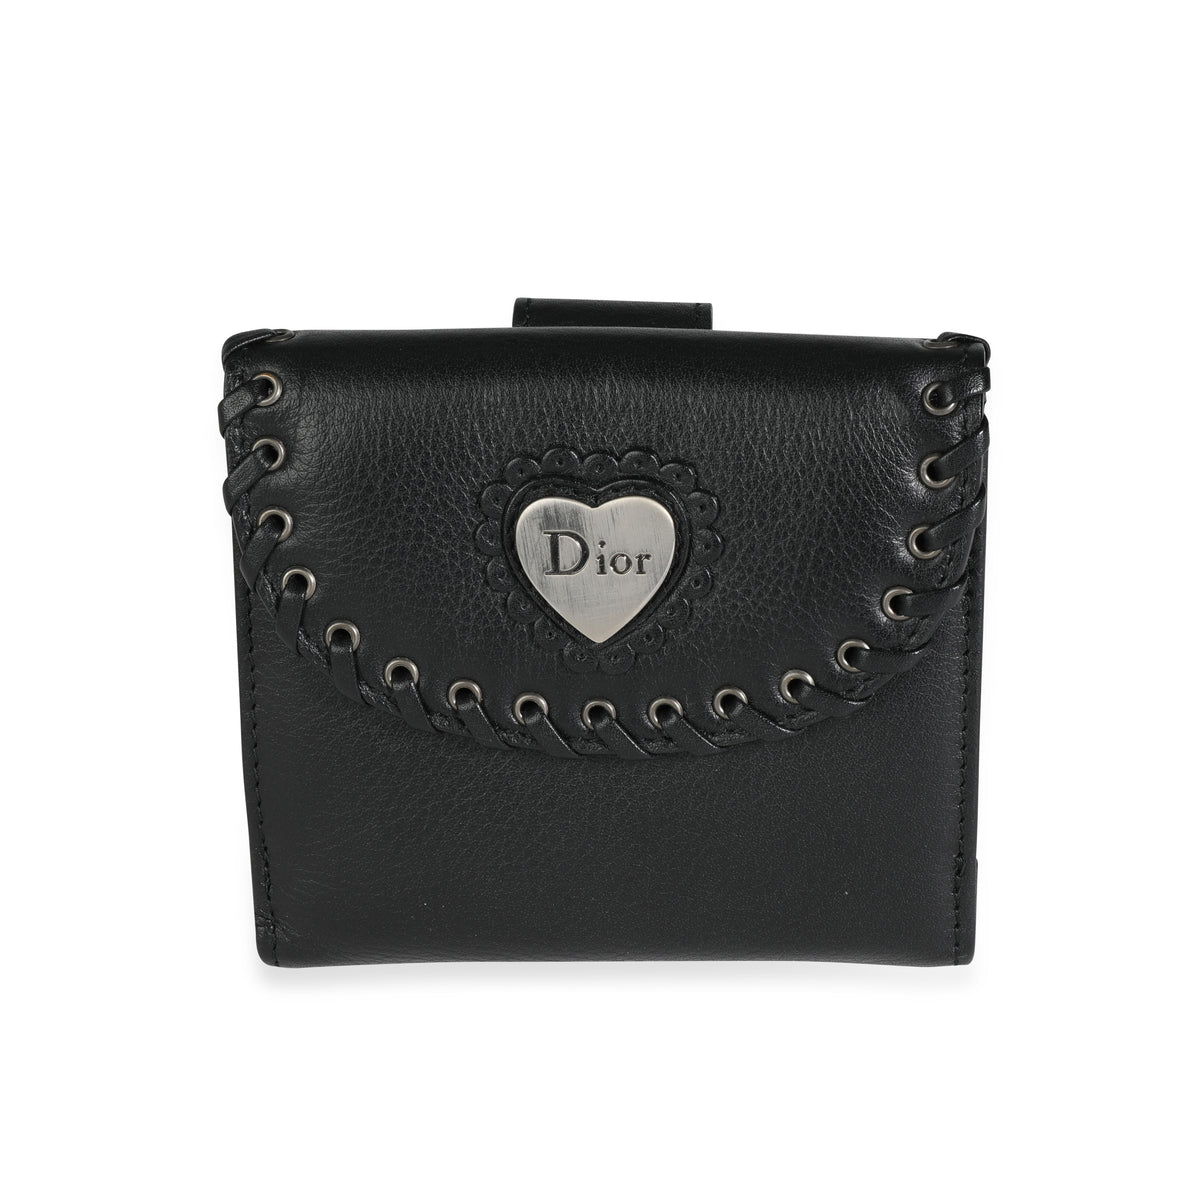 CHRISTIAN DIOR Heart Compact Wallet  nuoninevcom